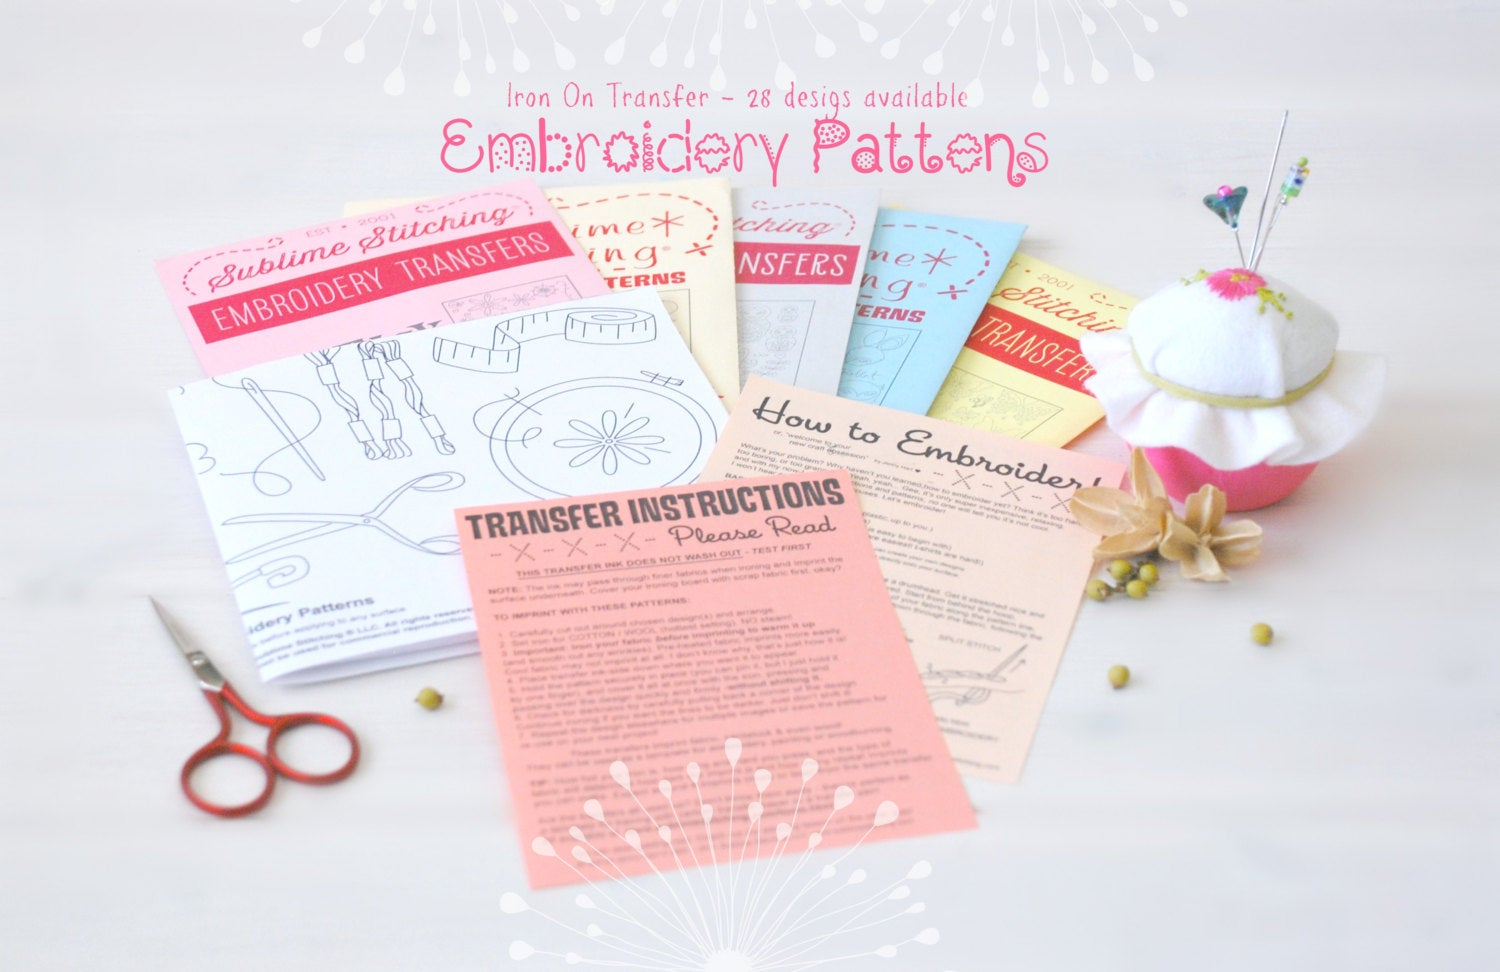 Embroidery Iron On Patterns Embroidery Patterns Iron On Patterns Diy Embroidery Patterns